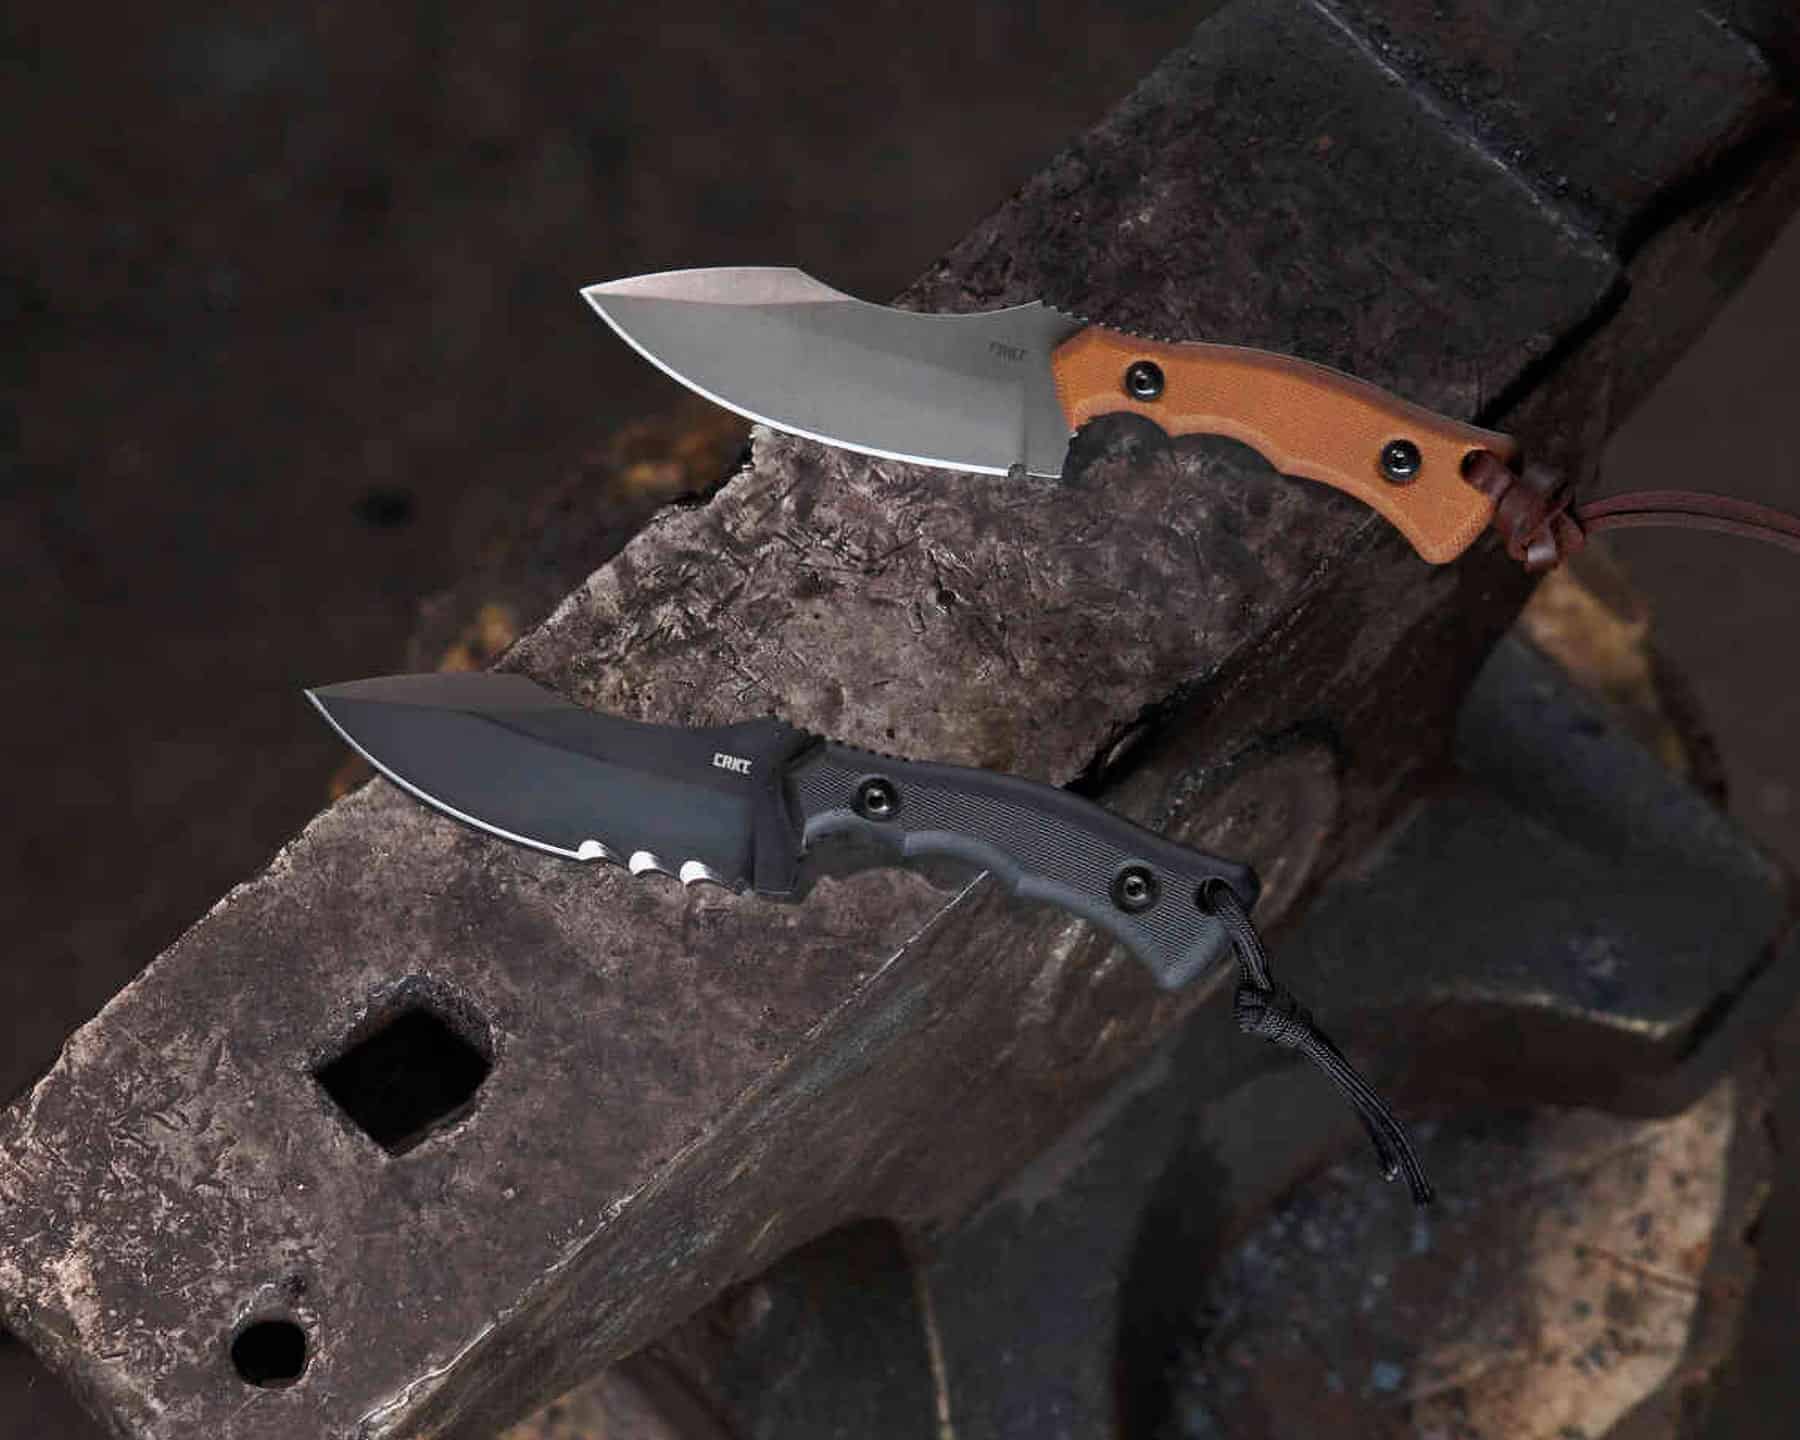 The Bugsy is available in a tactical version and a survival knife version.